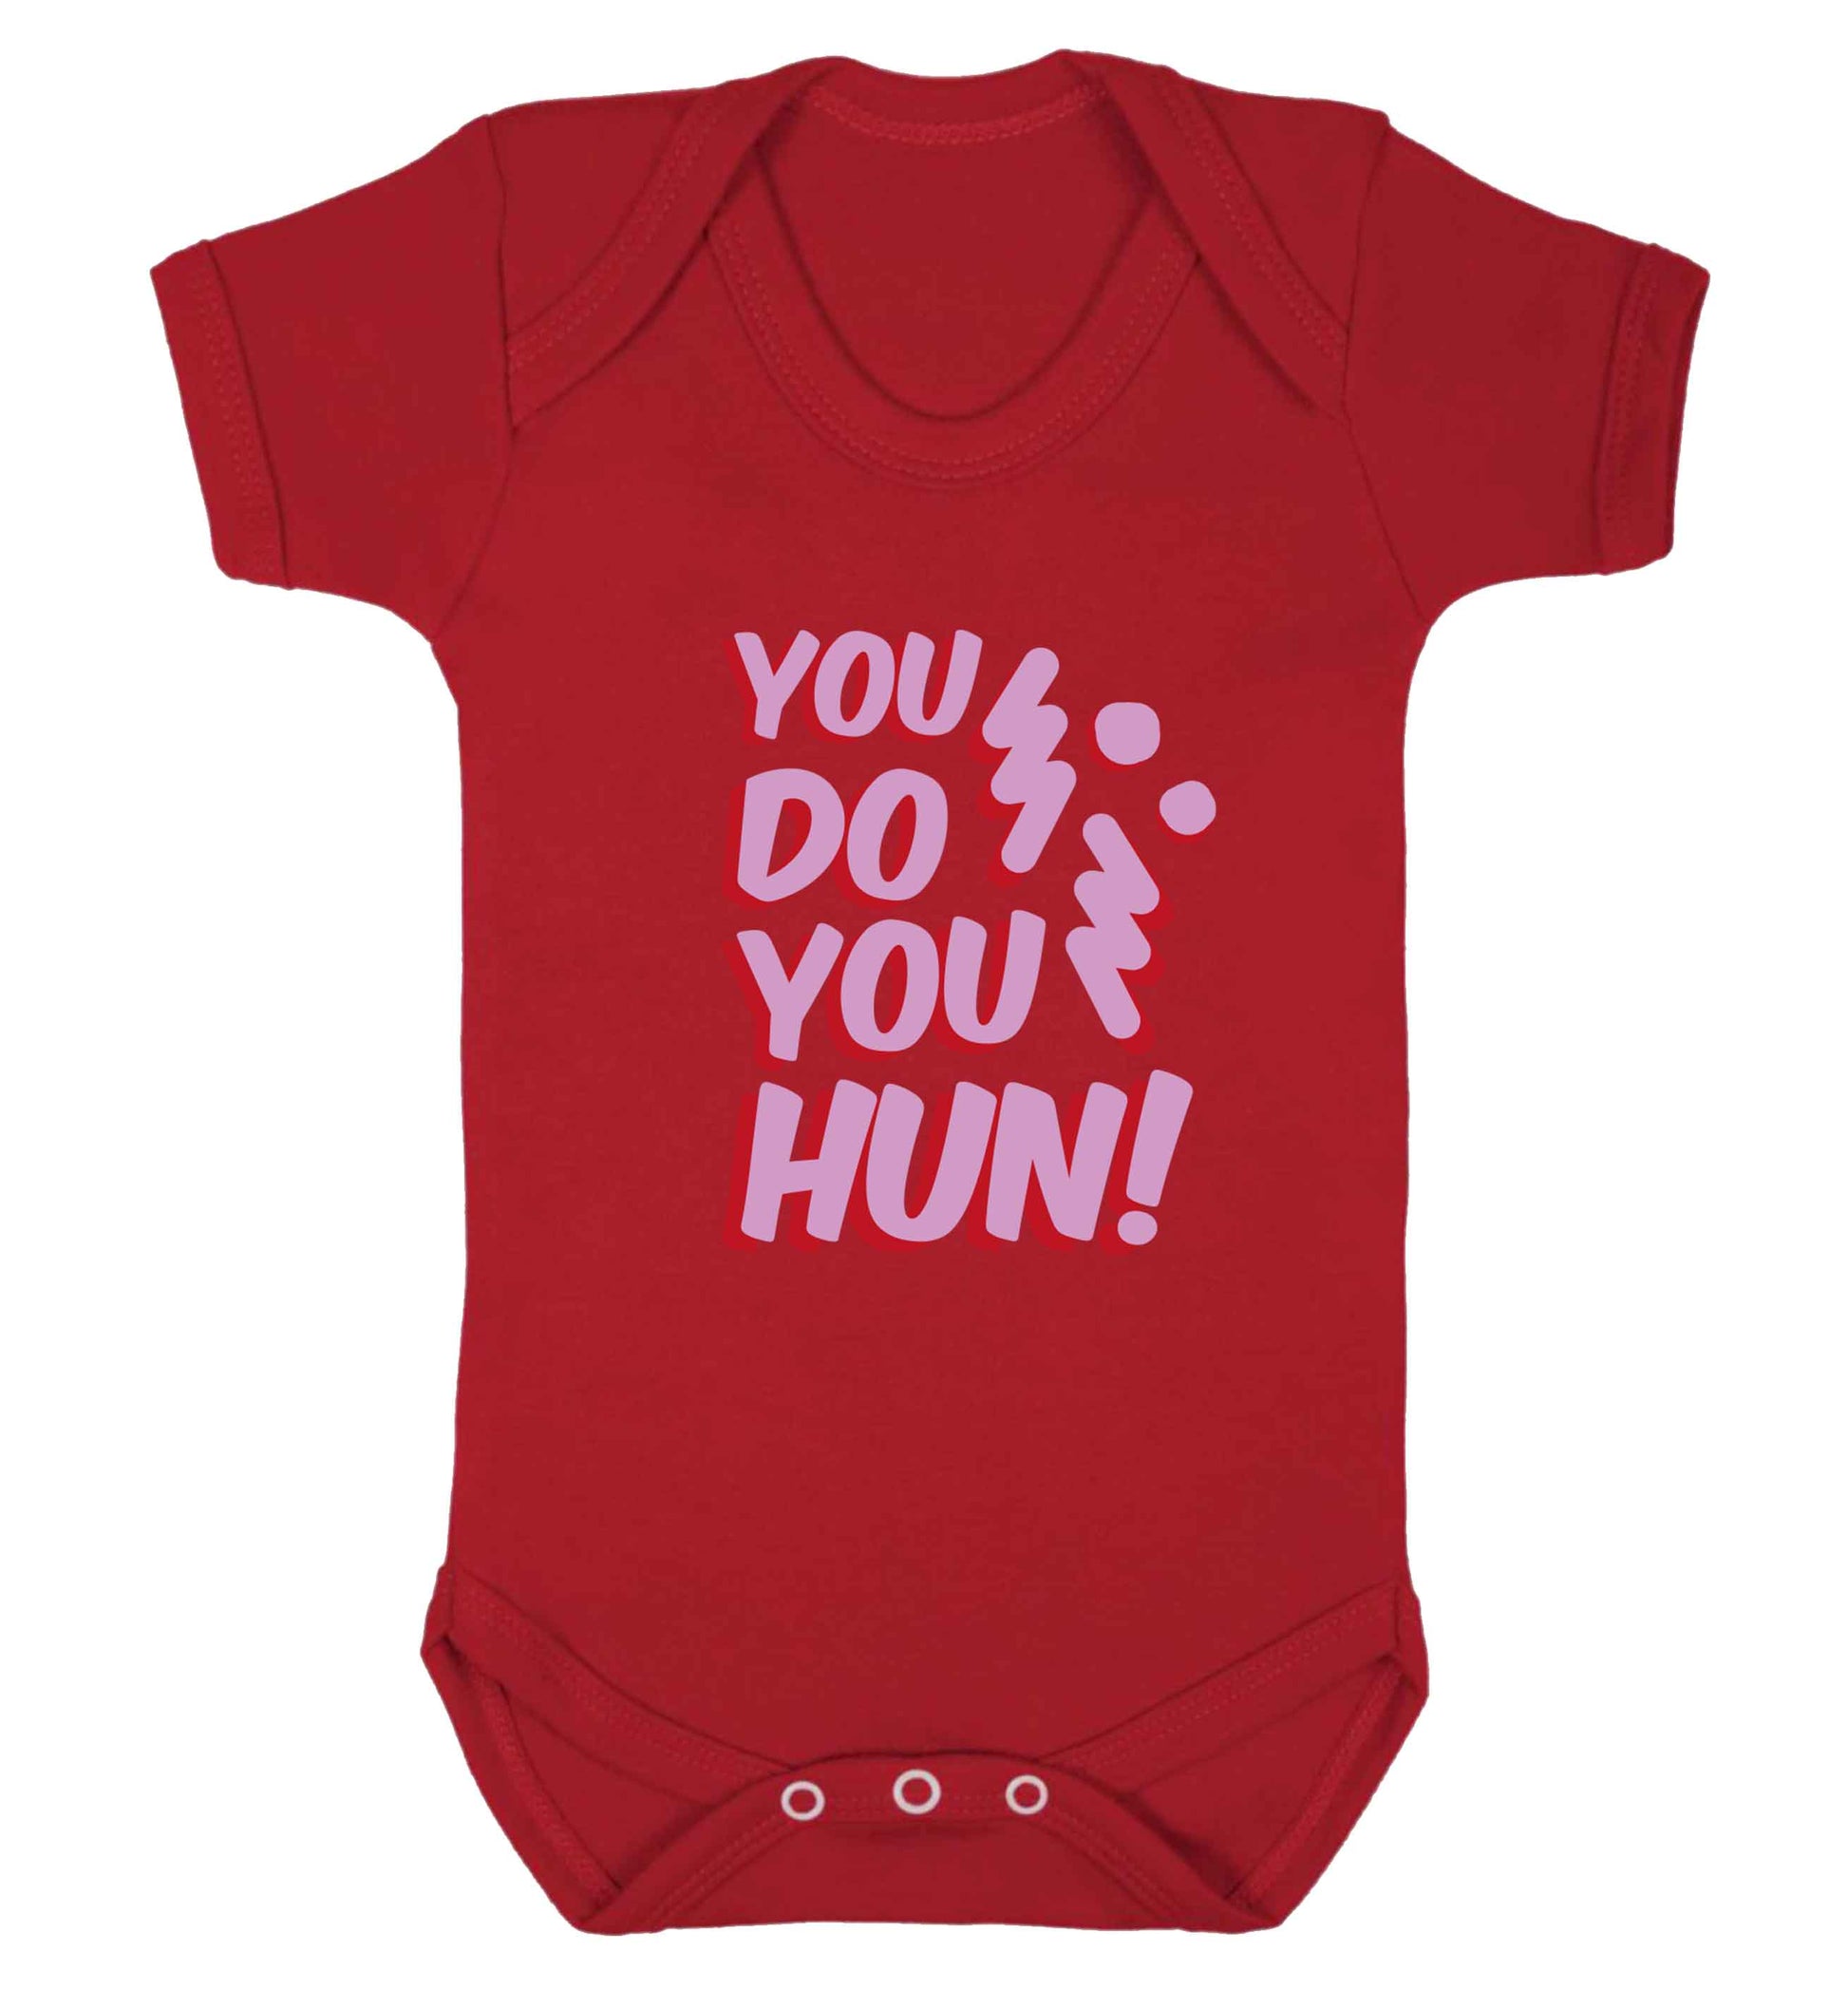 You do you hun baby vest red 18-24 months